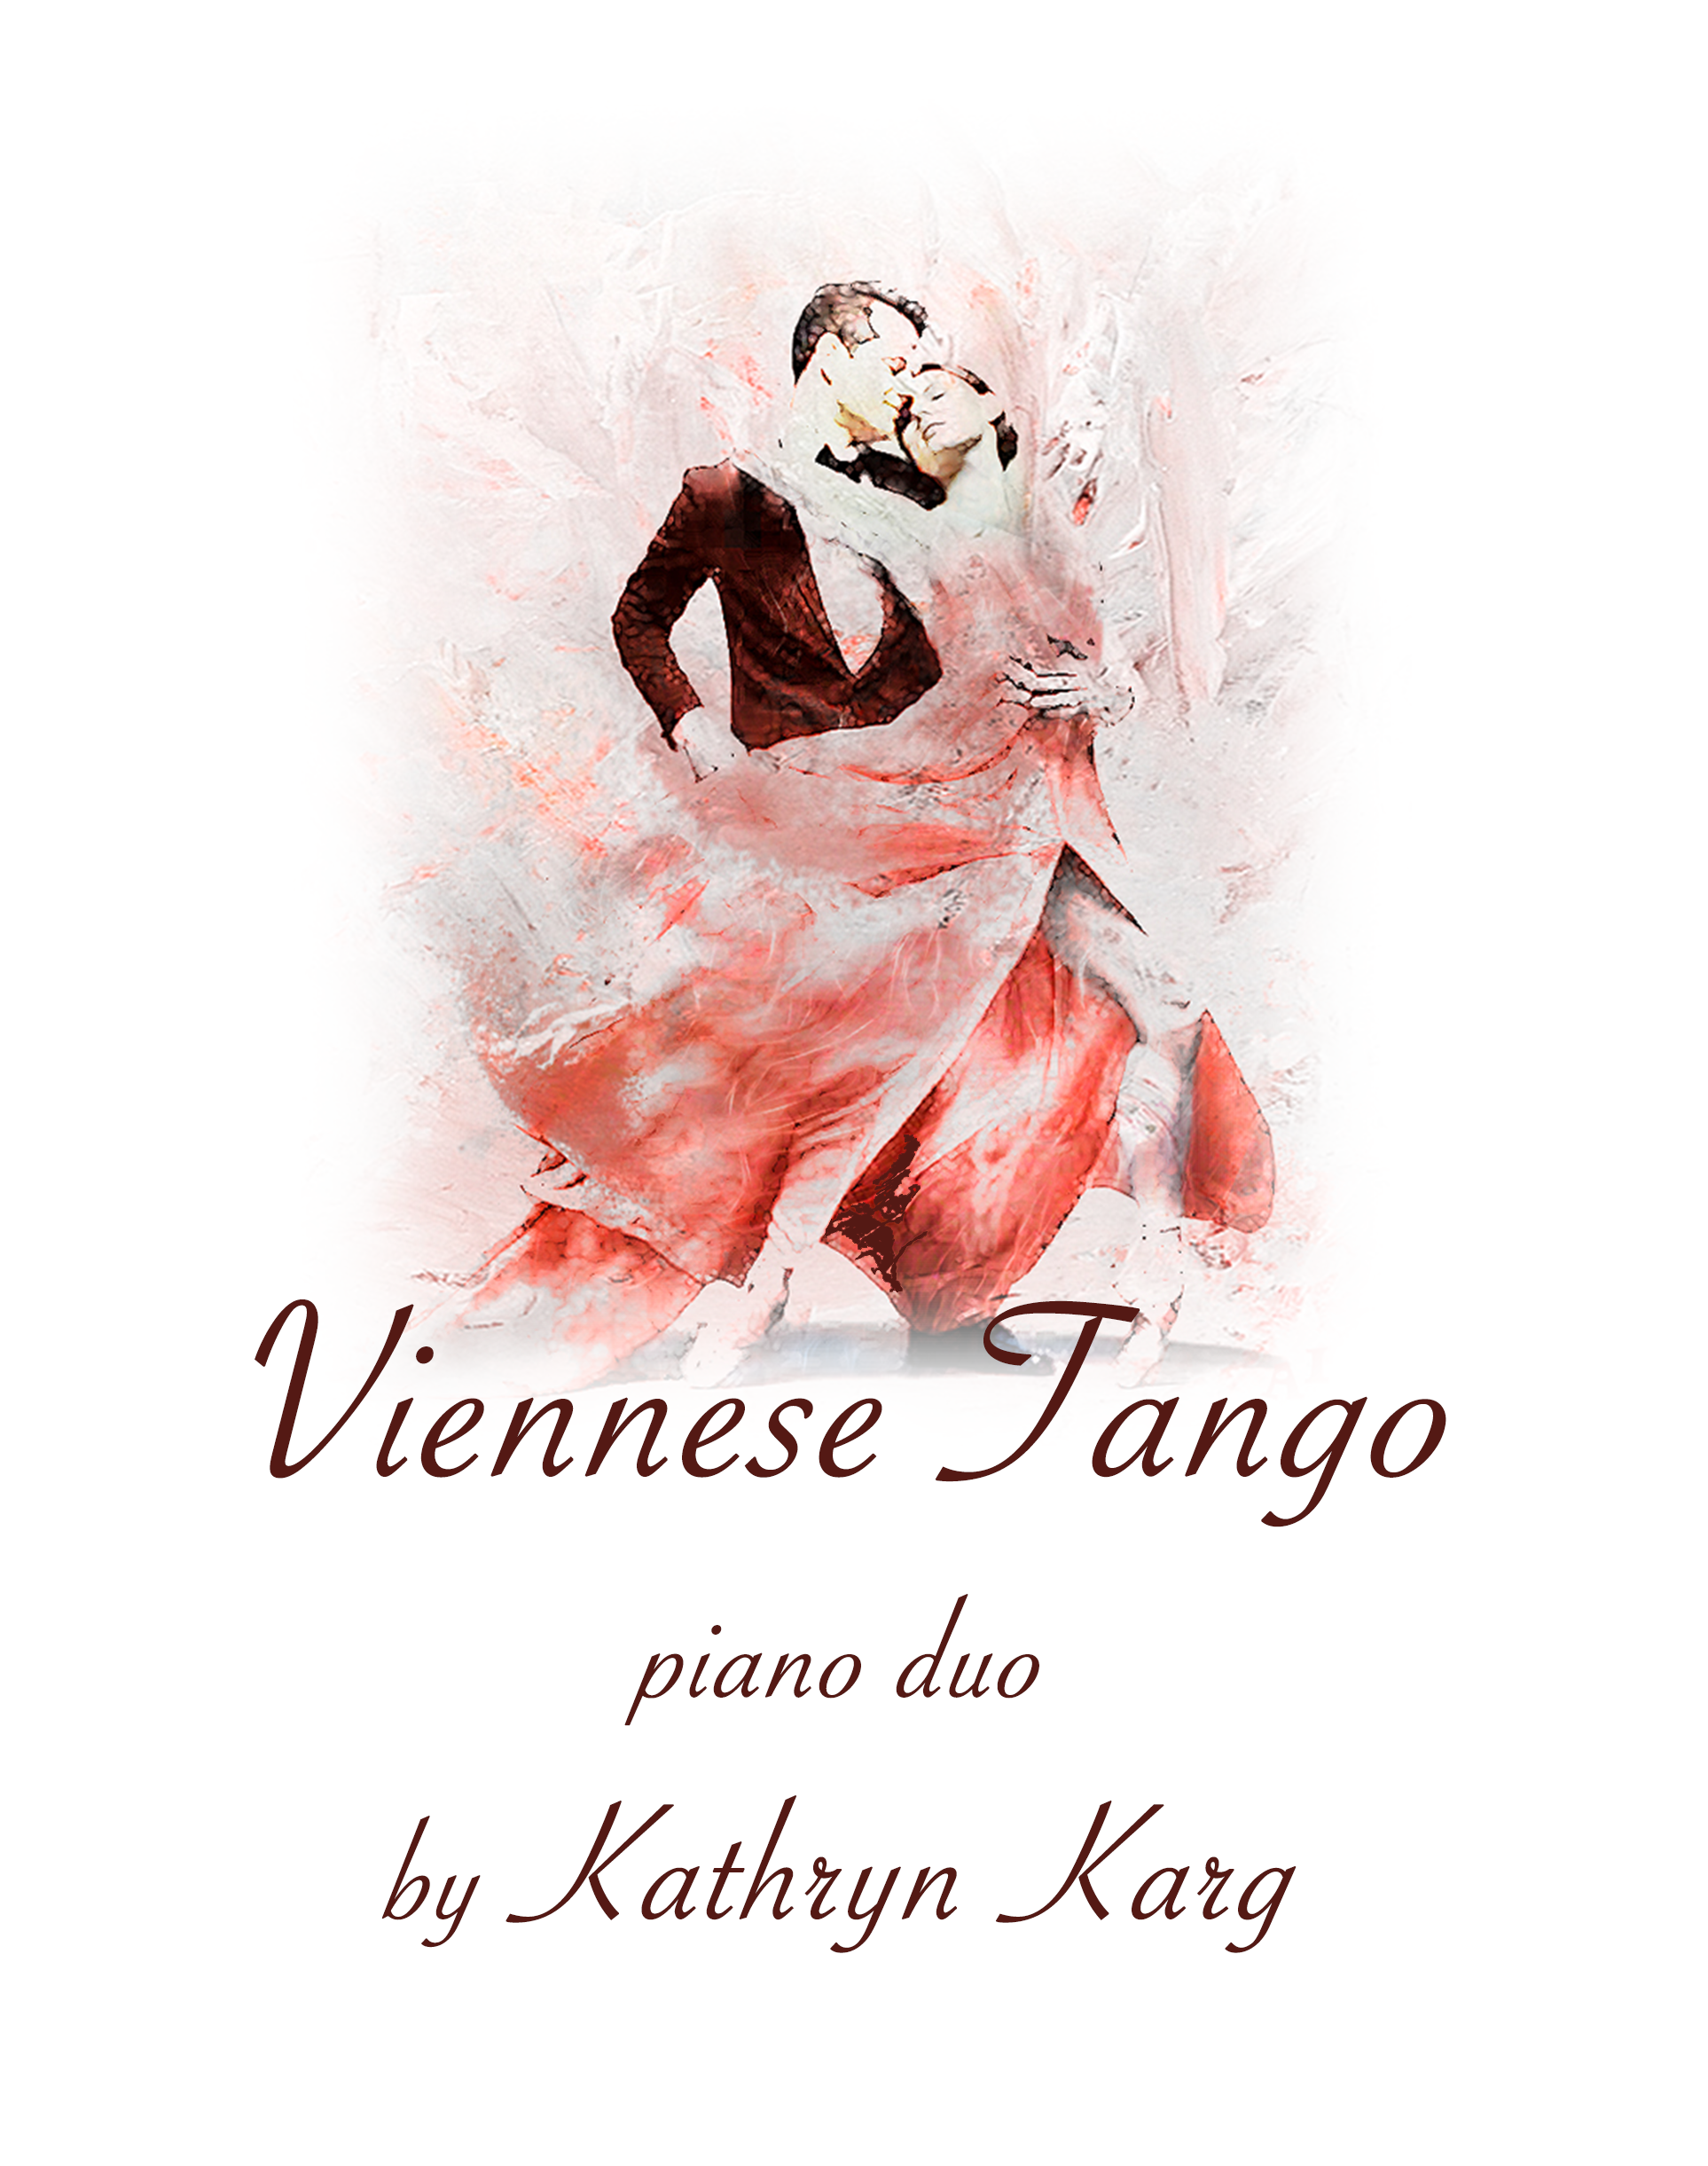 Viennese Tango duo cover